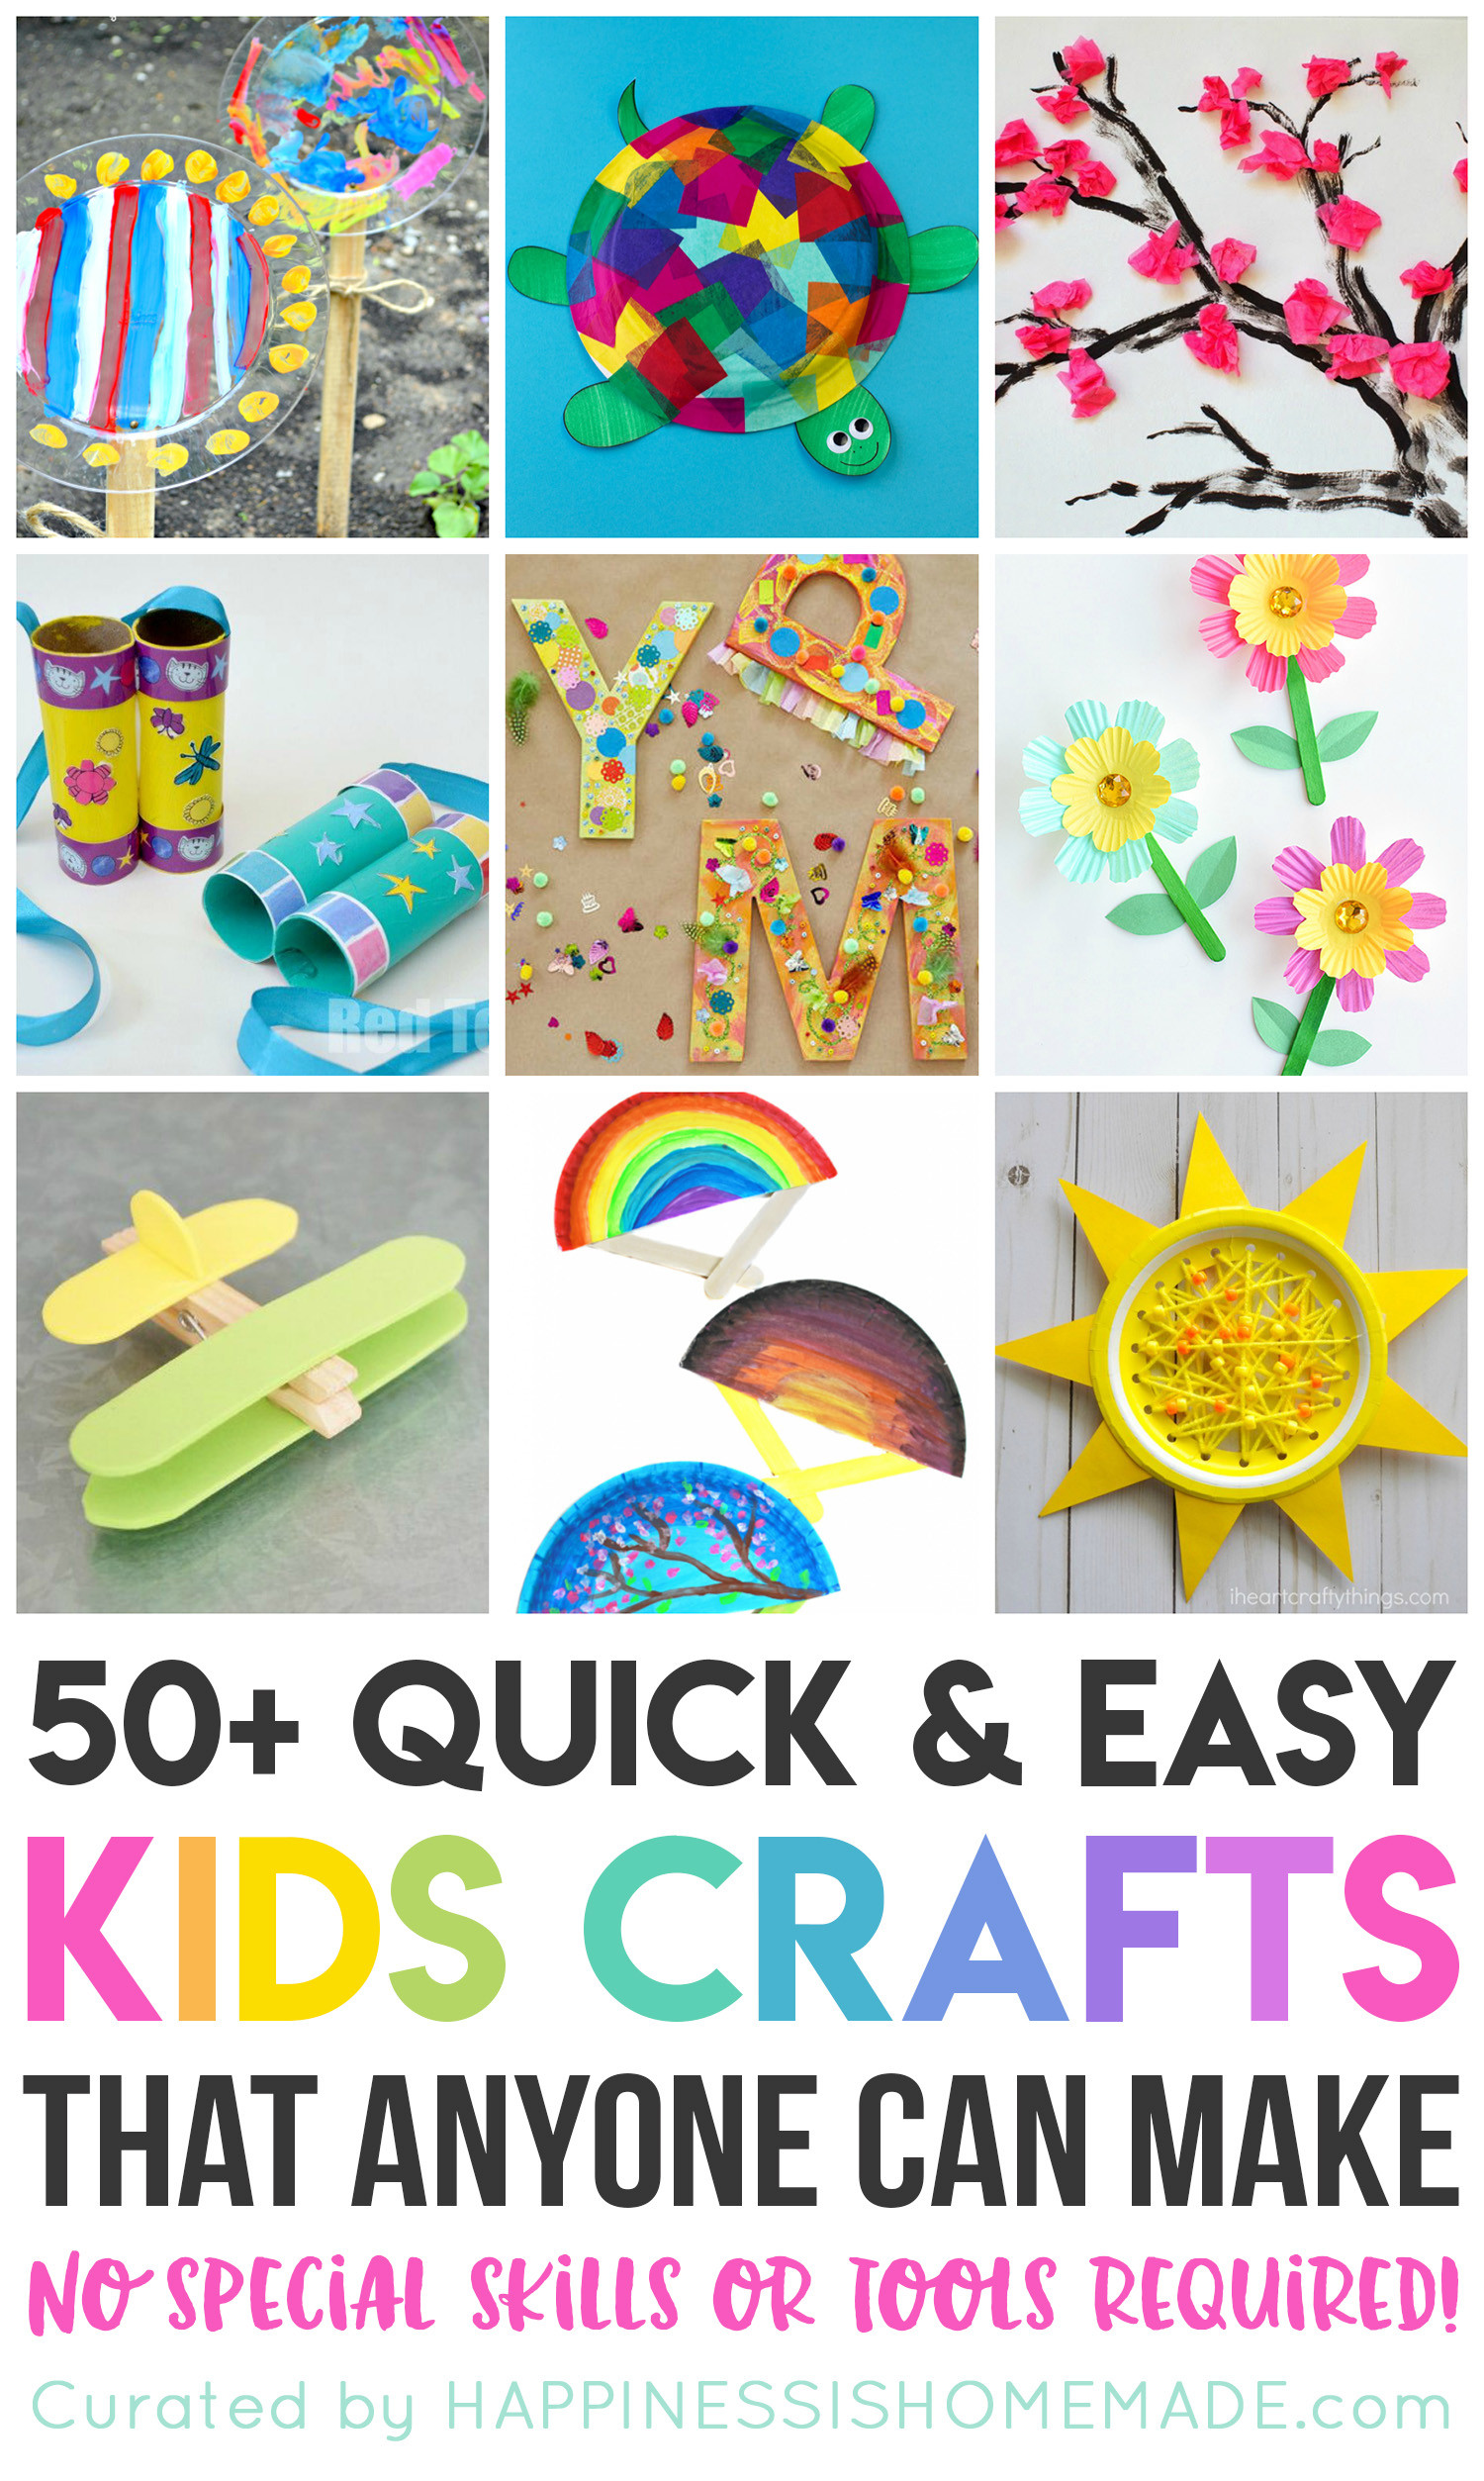 Easy Crafts For Kids
 Quick & Easy Halloween Crafts for Kids Happiness is Homemade